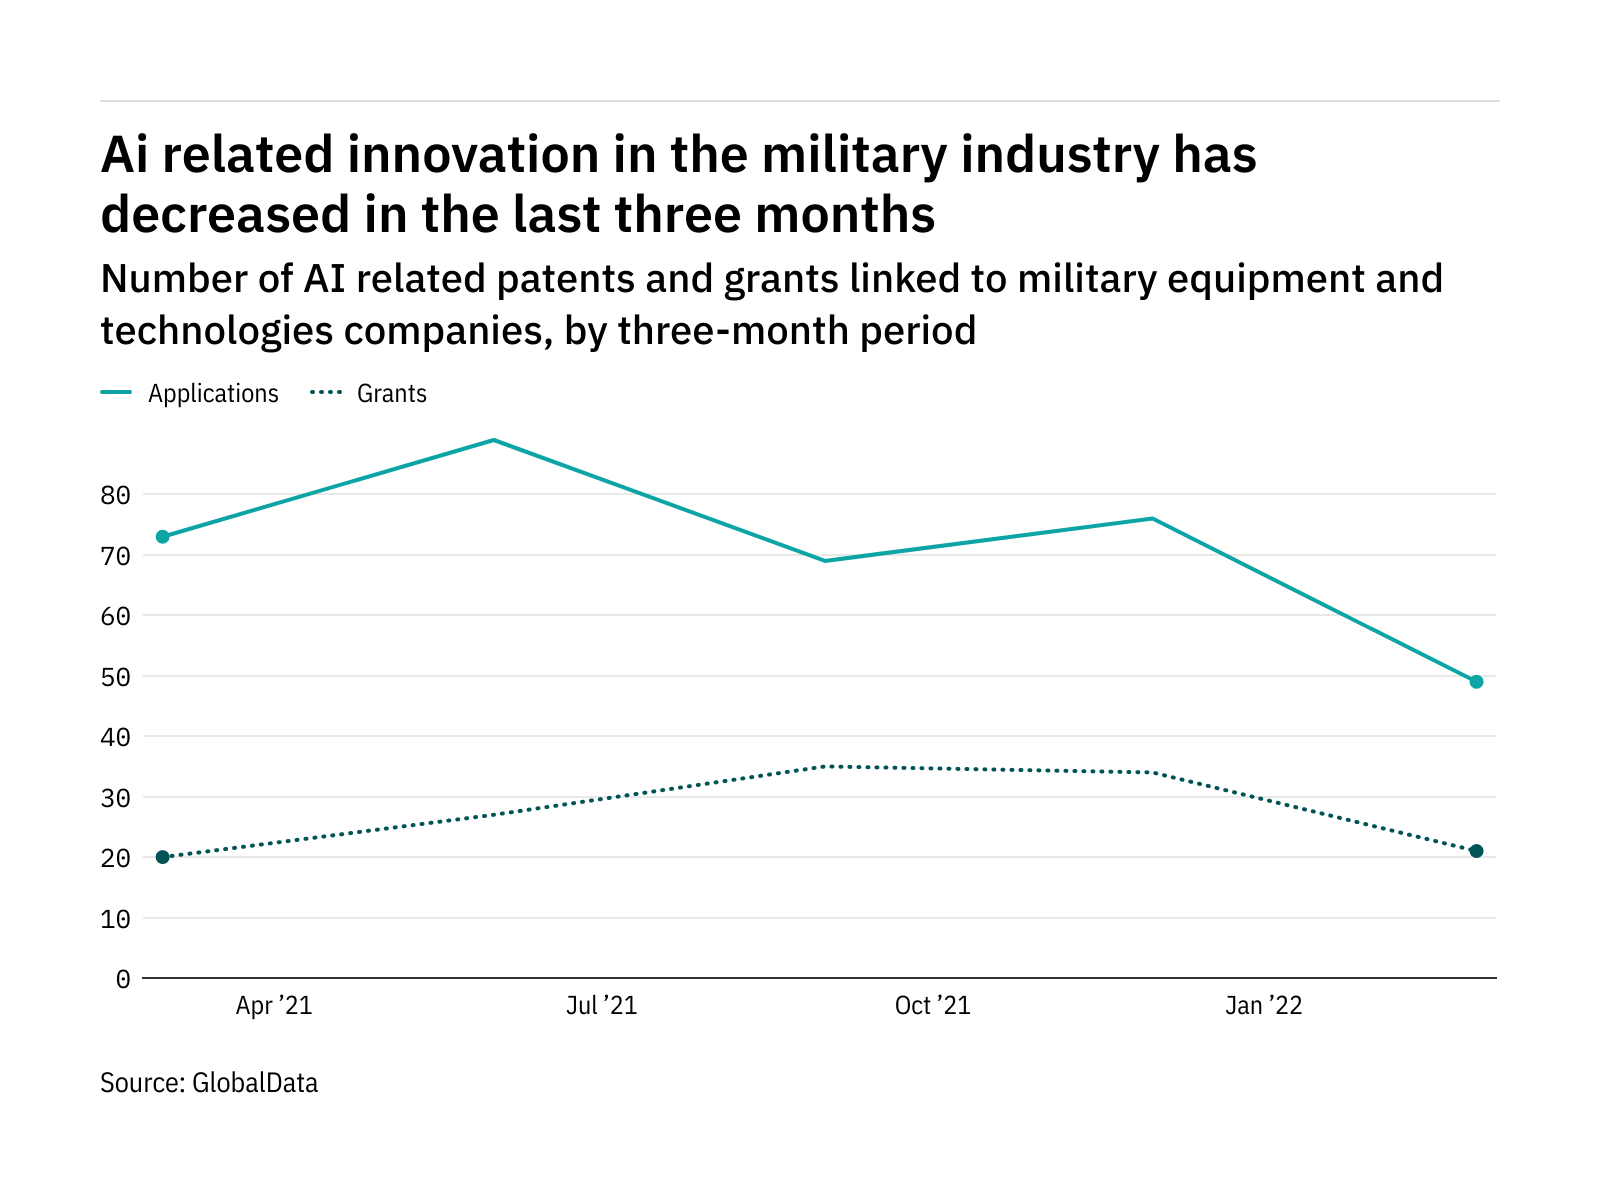 Artificial intelligence innovation among military industry companies has dropped off in the last year